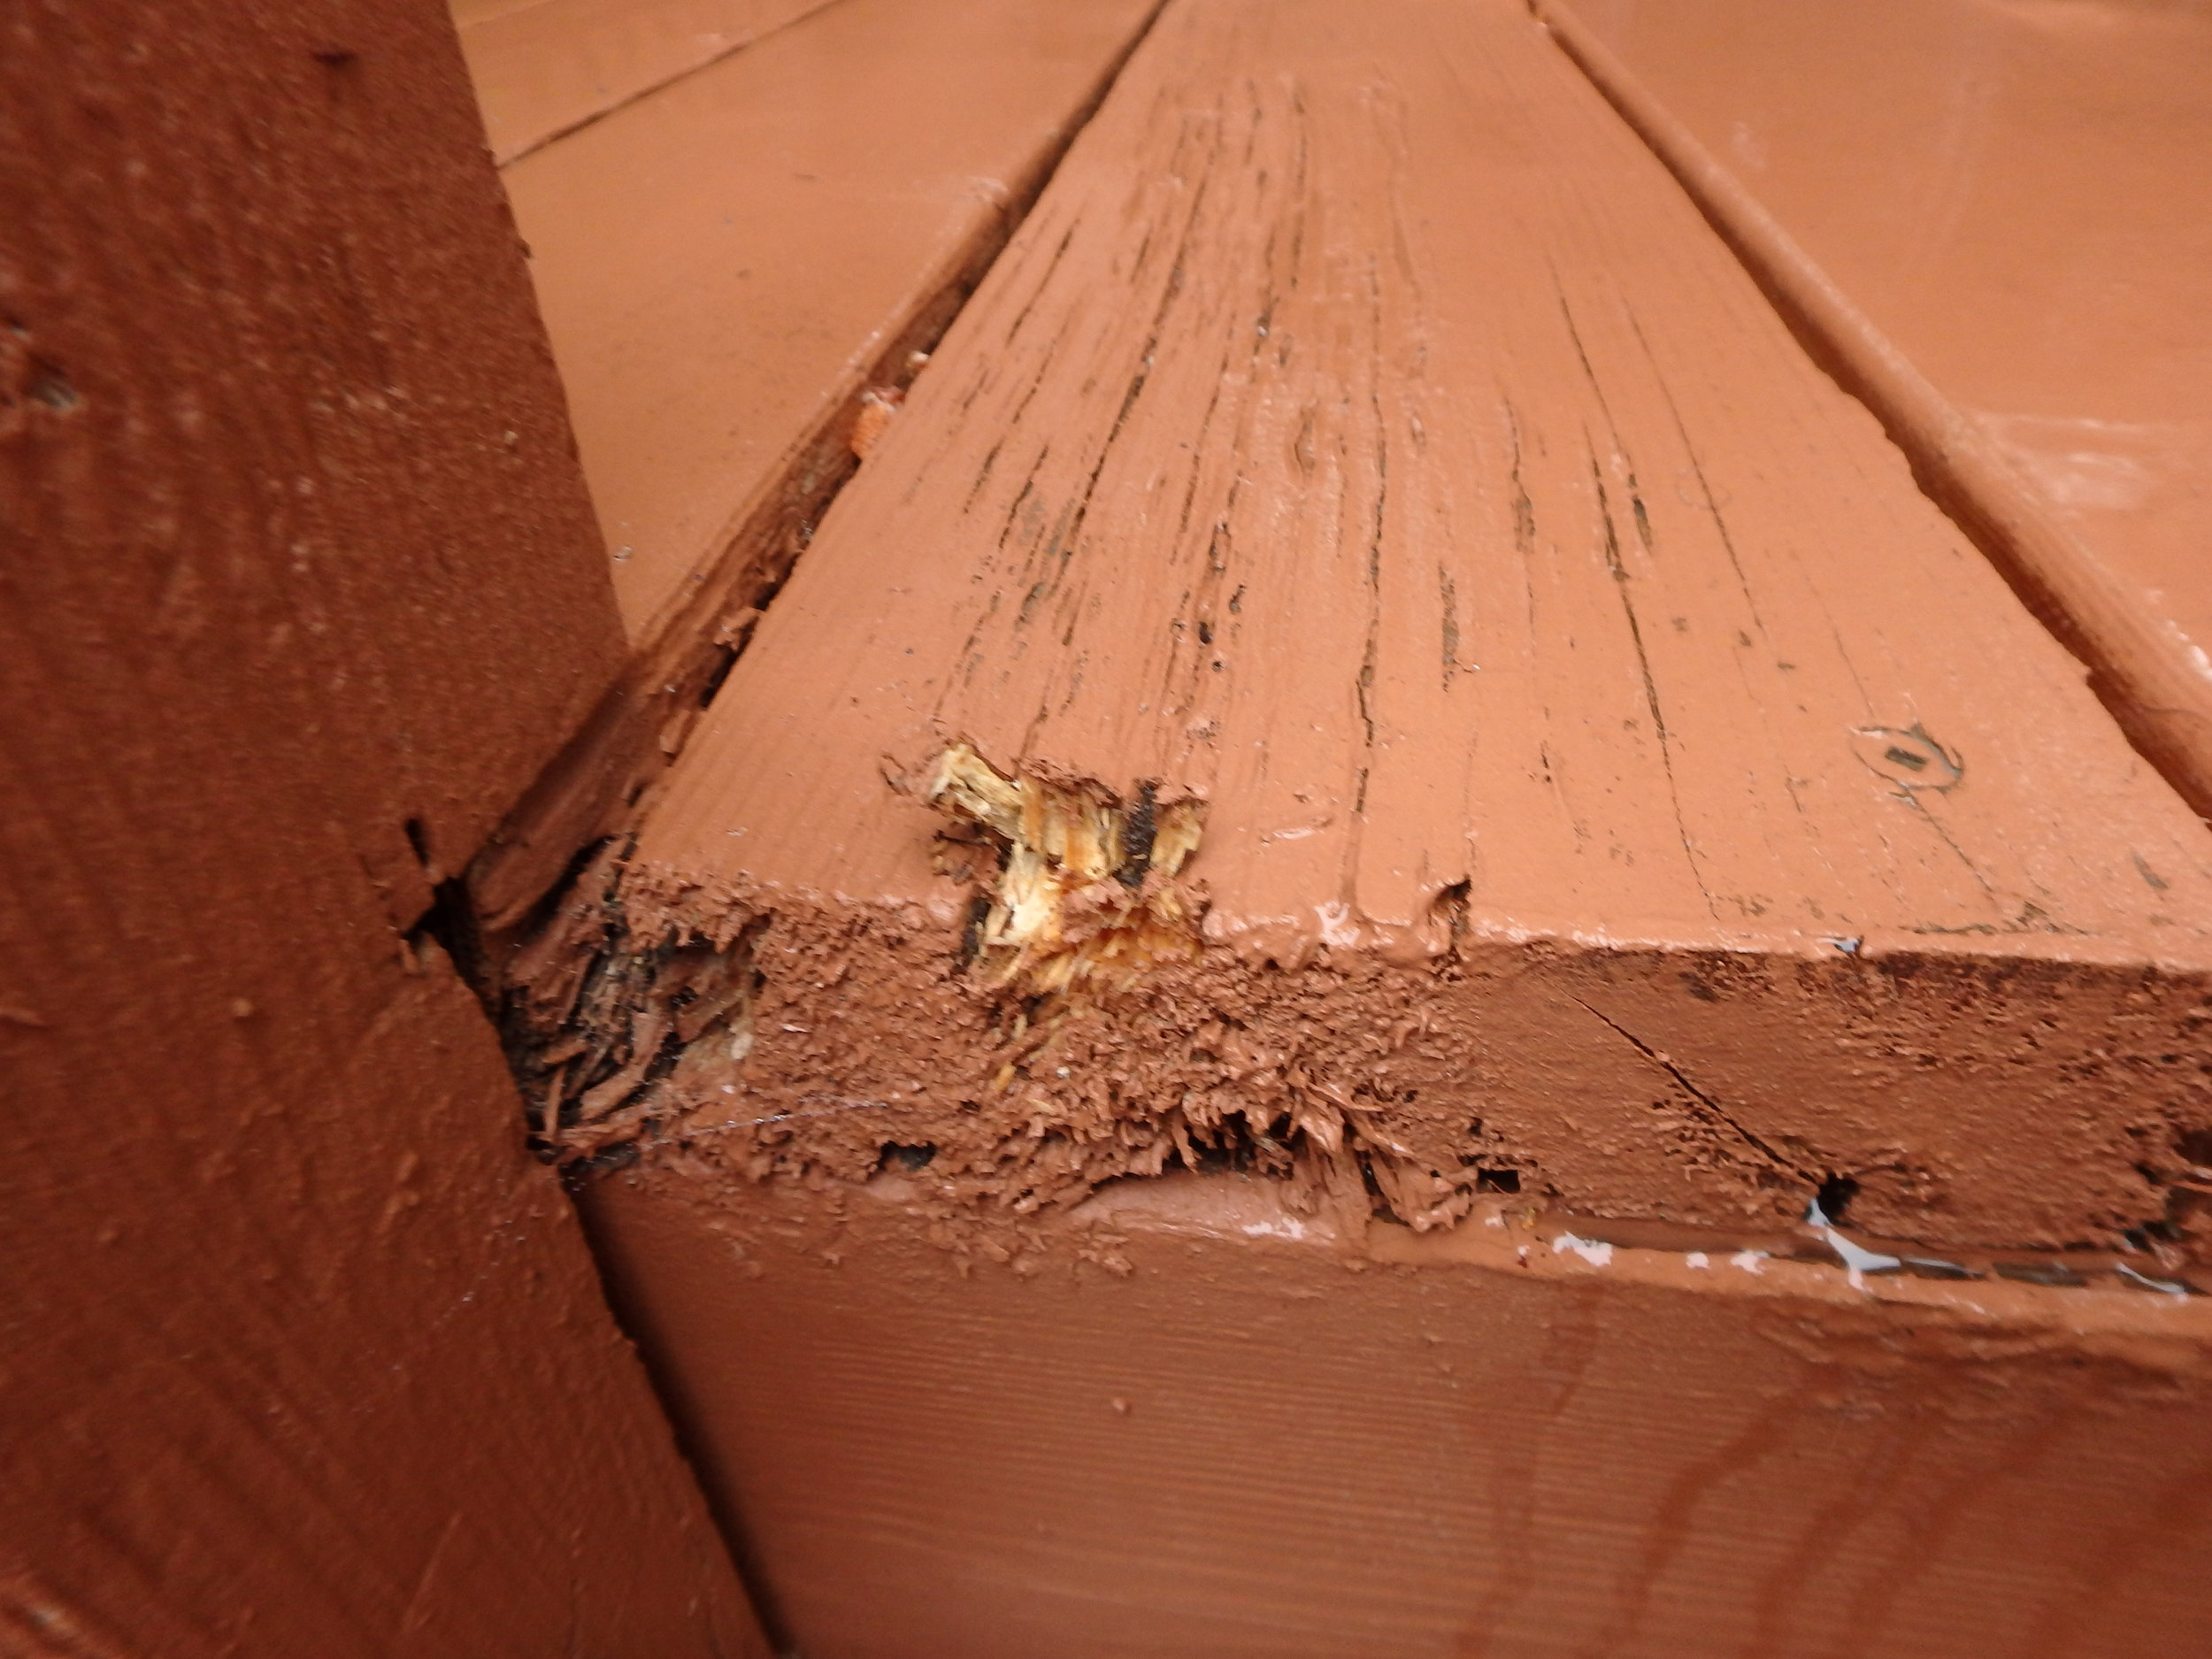 Common Deck Defects Found During Home Inspection — Caliper Home Inspections